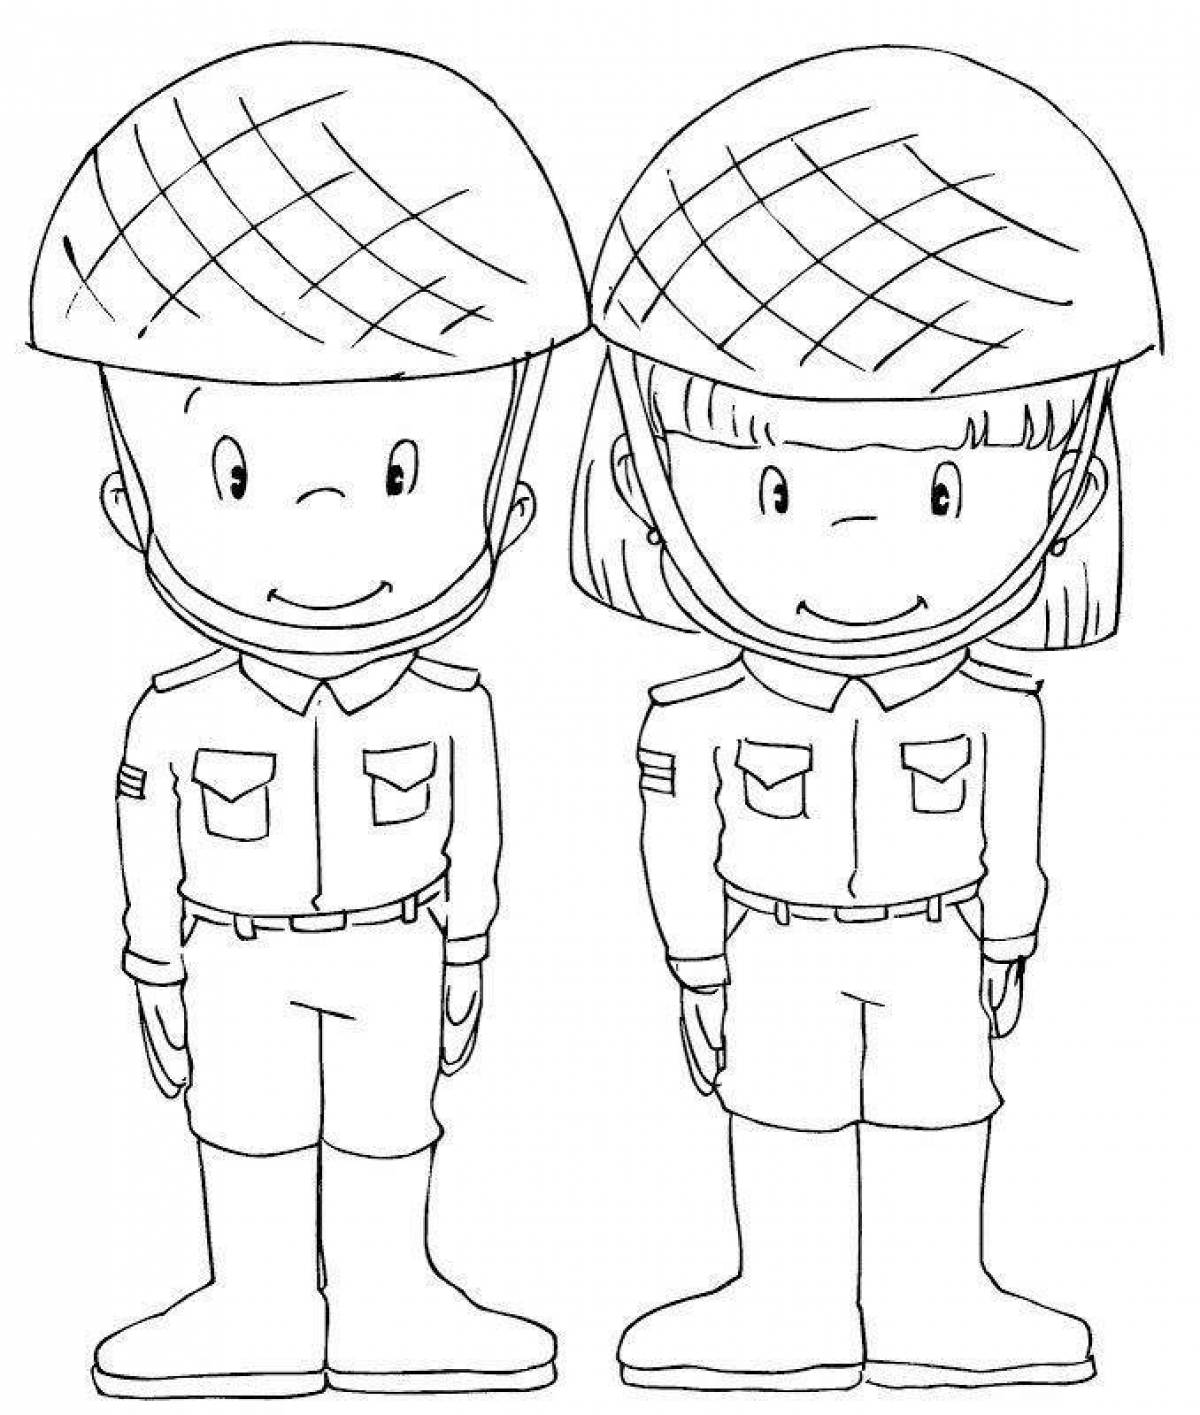 Fascinating soldier coloring page 23 February